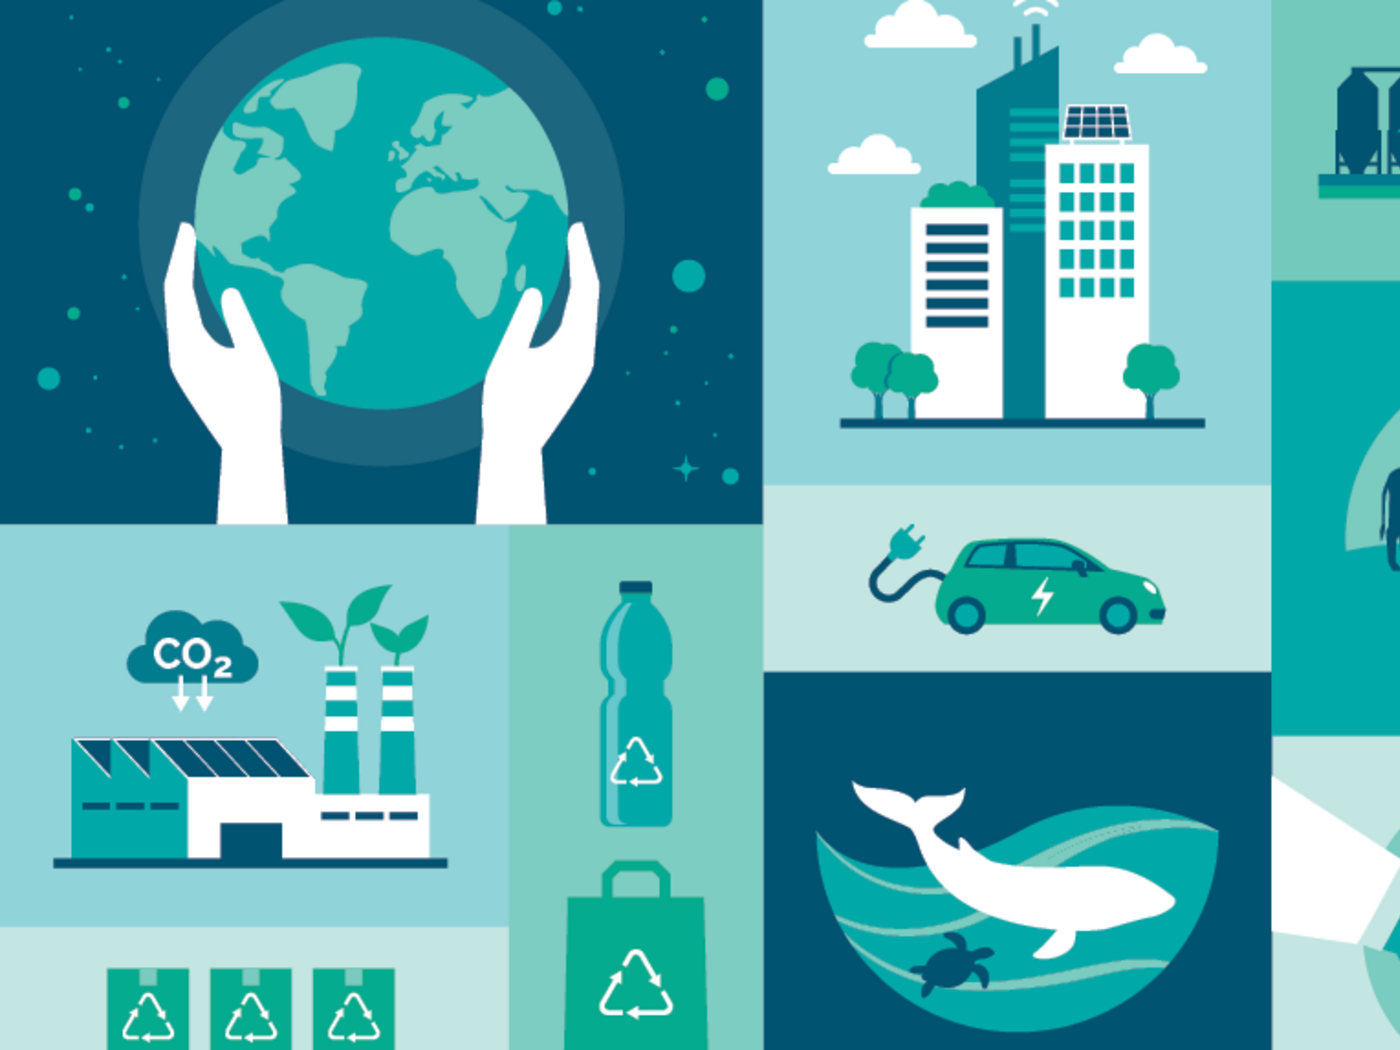 Illustration of globe, city, green climate solutions